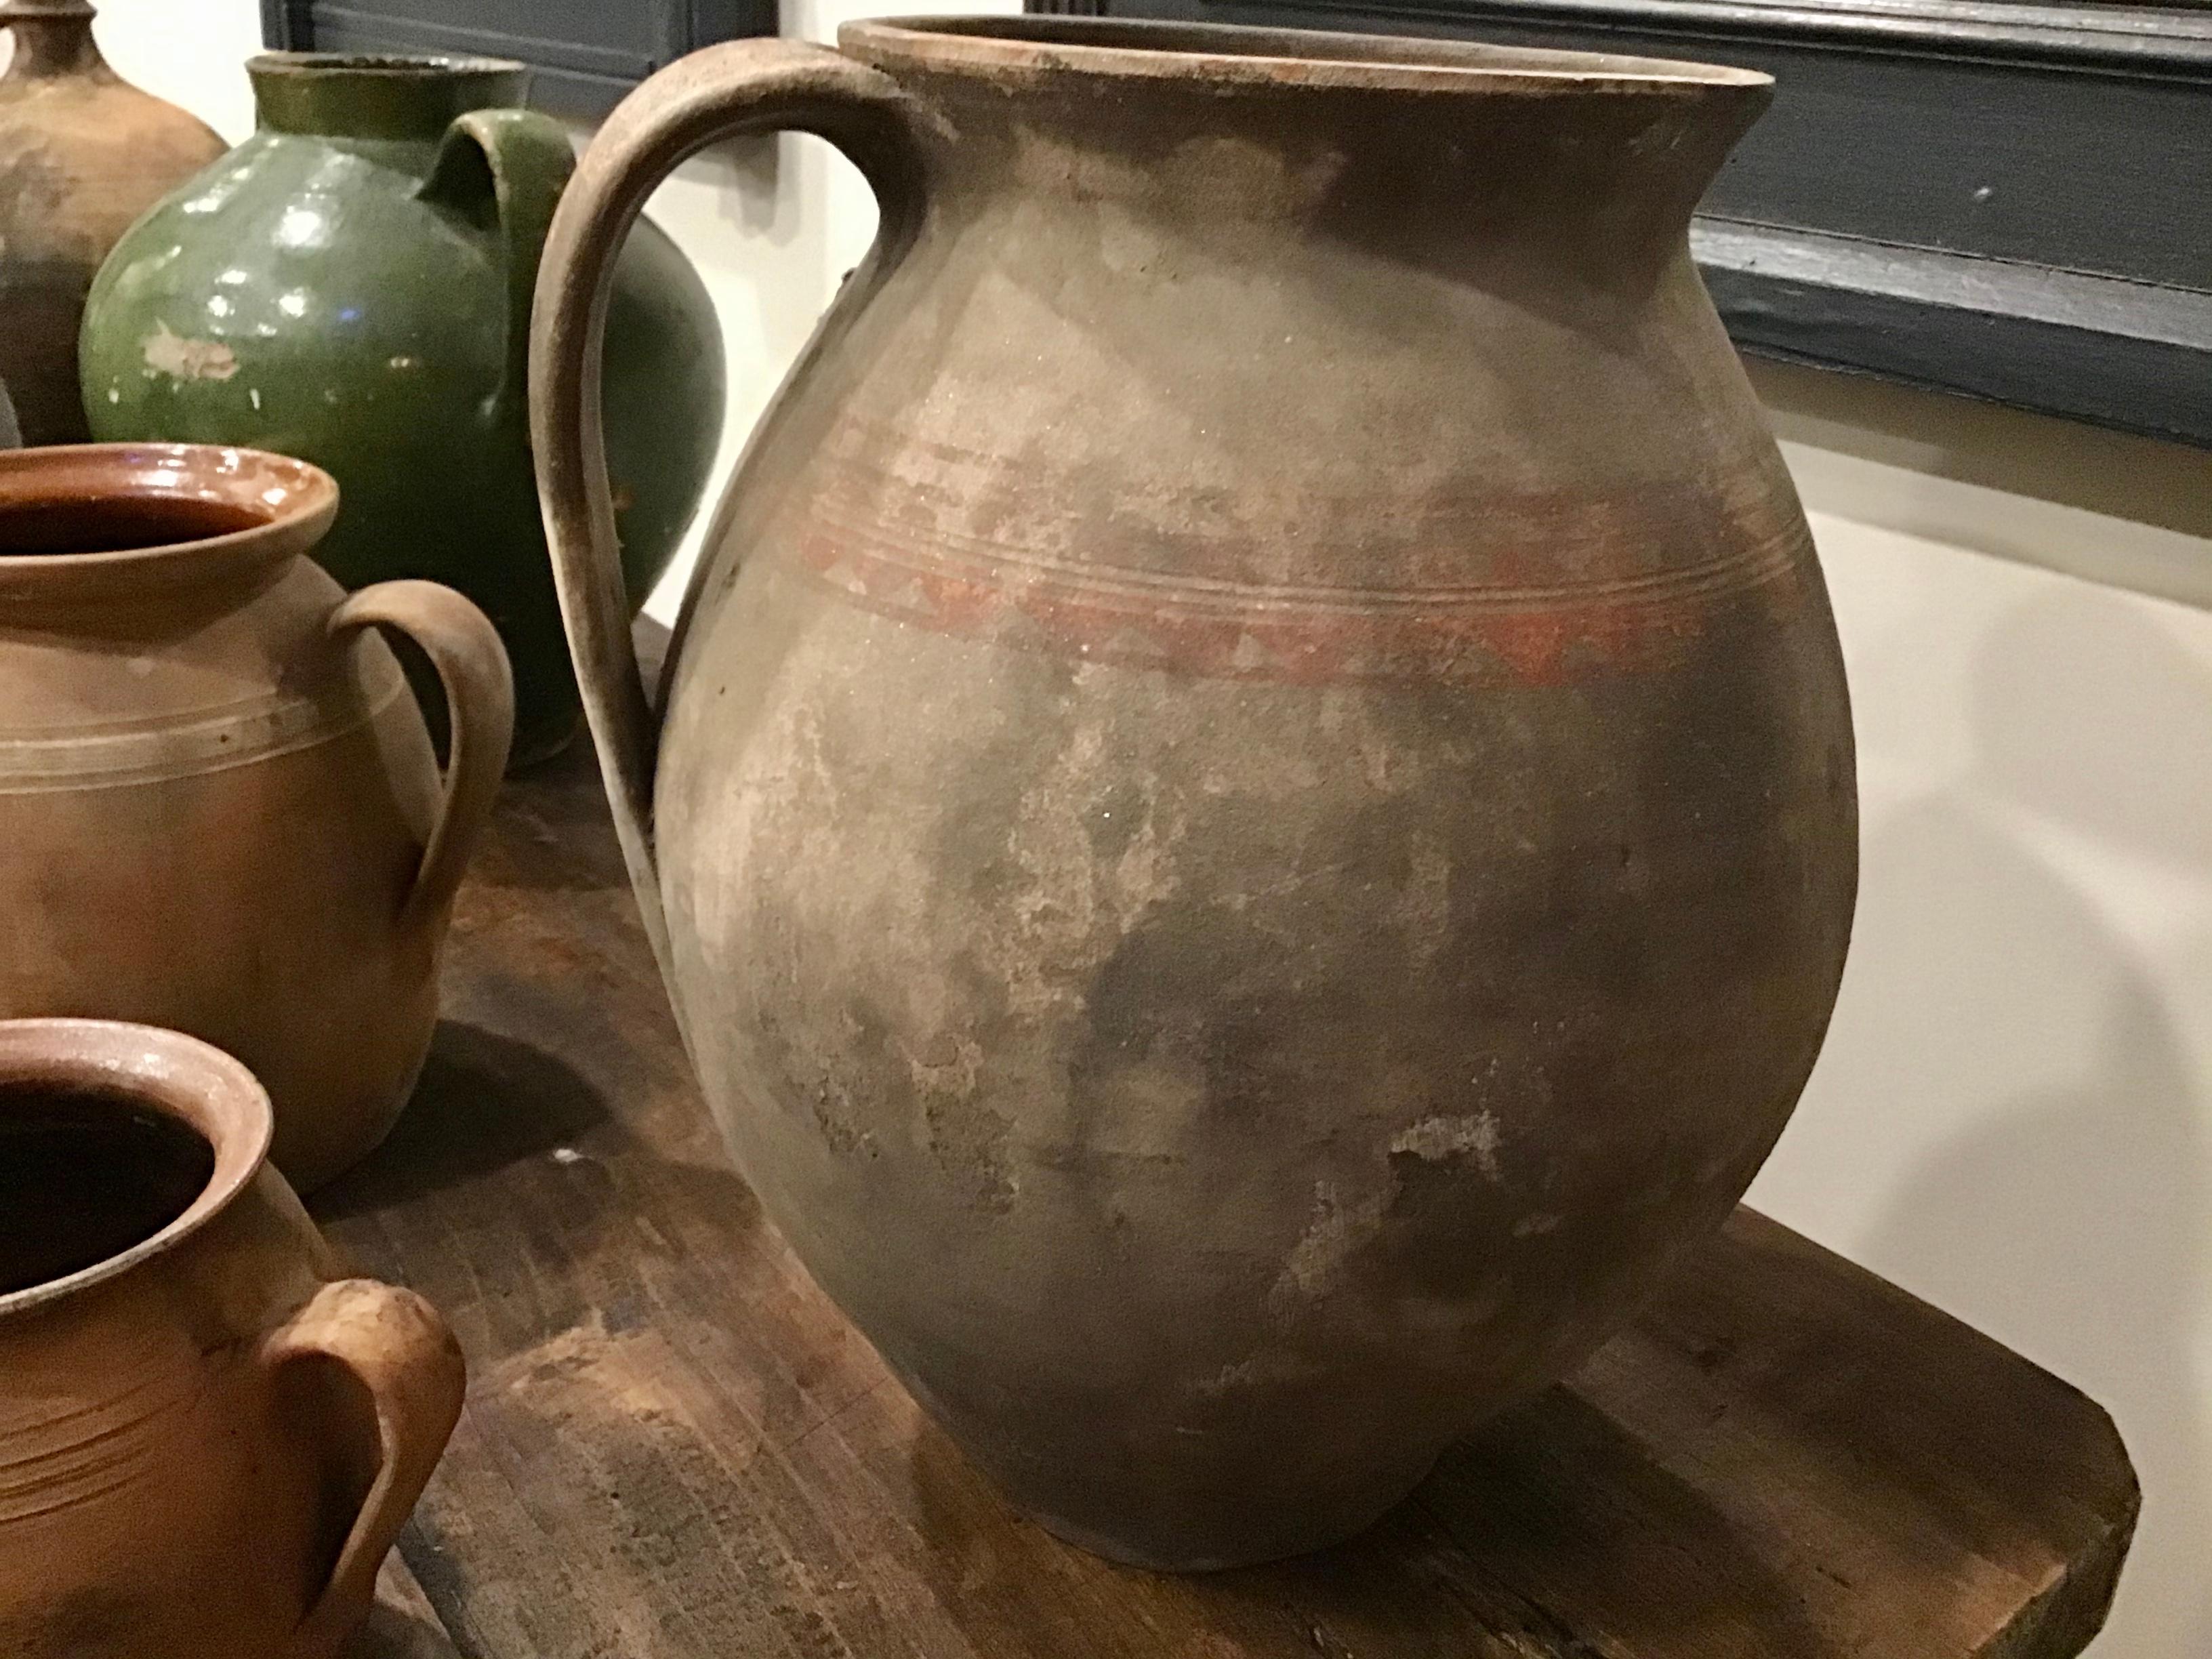 Single handle, unglazed vintage gray French jug primarily used to transport water and other liquids. Original orange stripes around jug still visible with aged salt deposits.
  